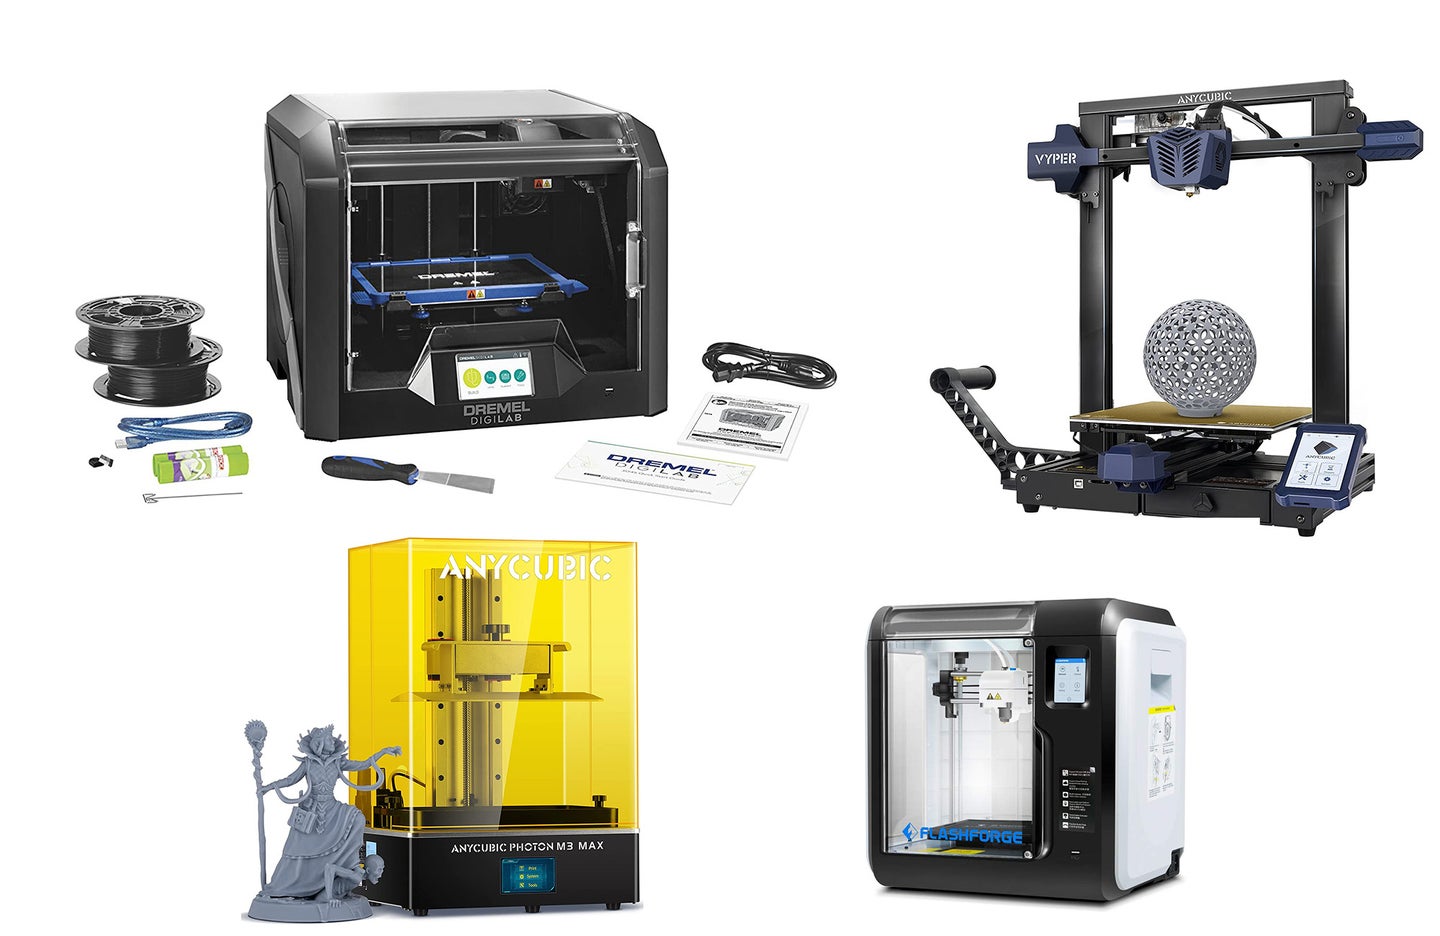 Save hundreds on 3D printers during the Amazon Early Access Sale.